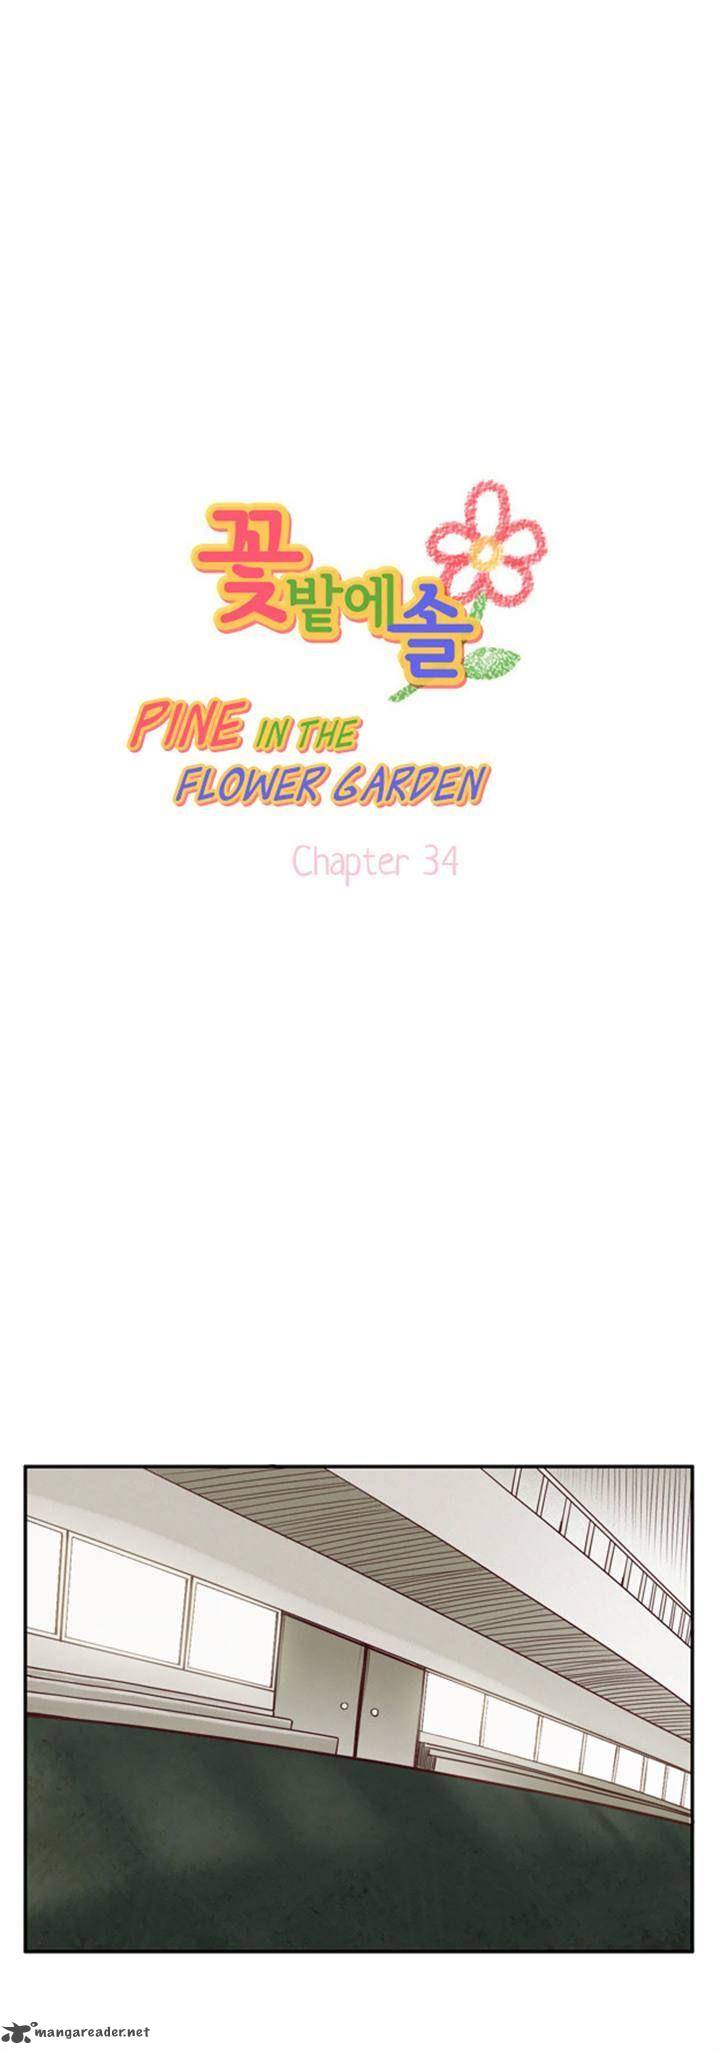 Pine In The Flower Garden Chapter 34 Page 1